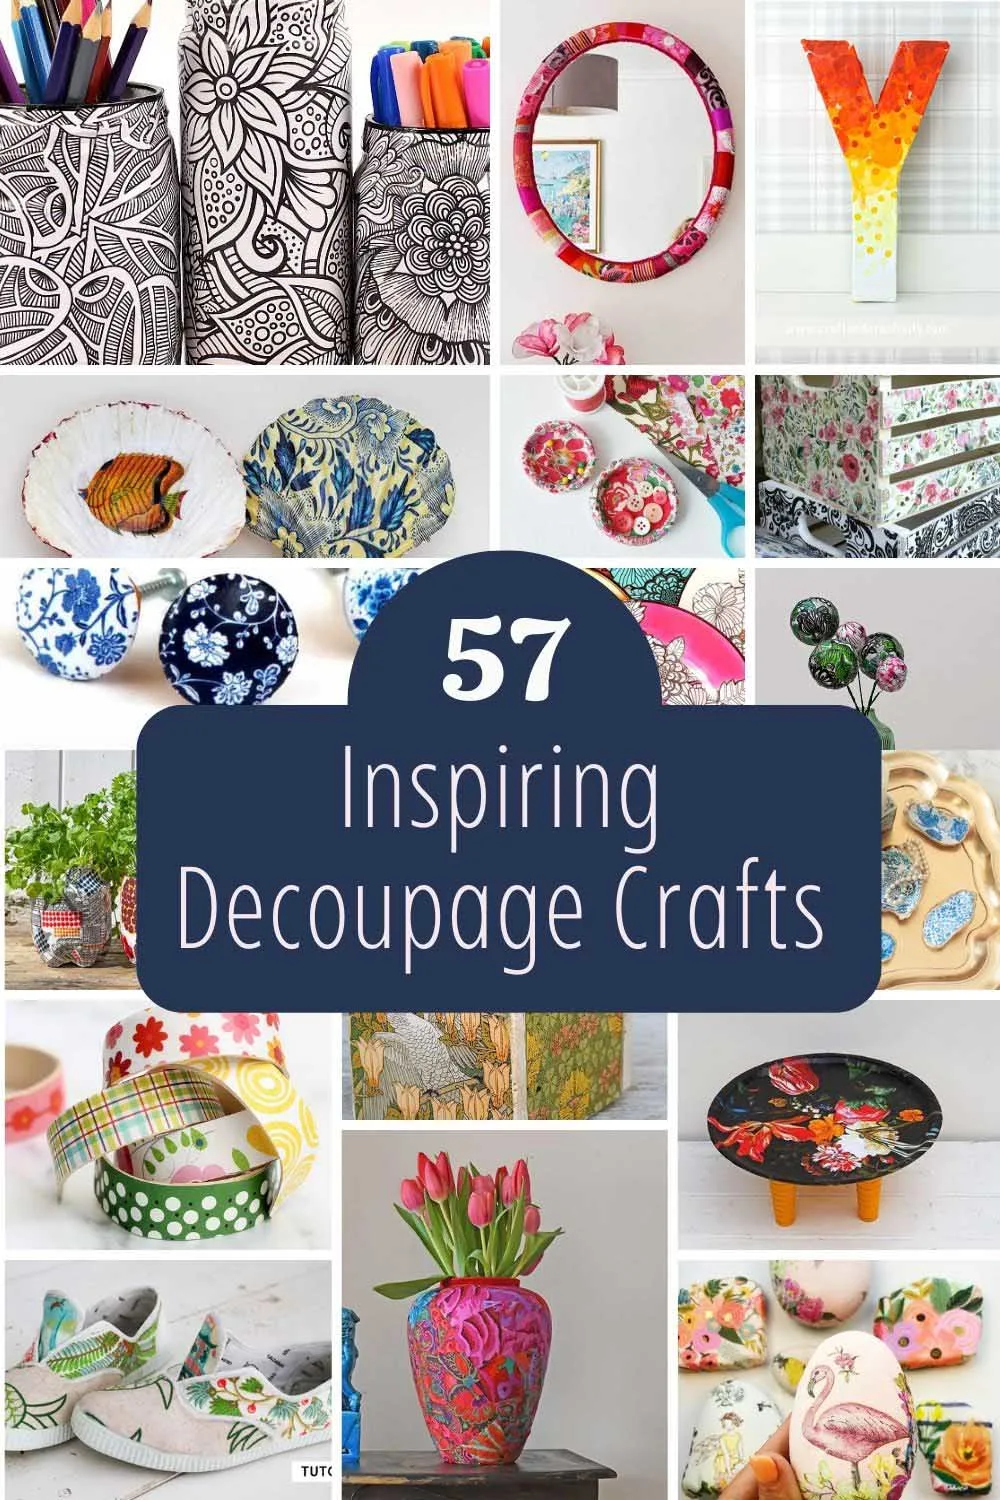 Decoupage Craft Ideas For Adults - You'll want to try - Pillar Box Blue